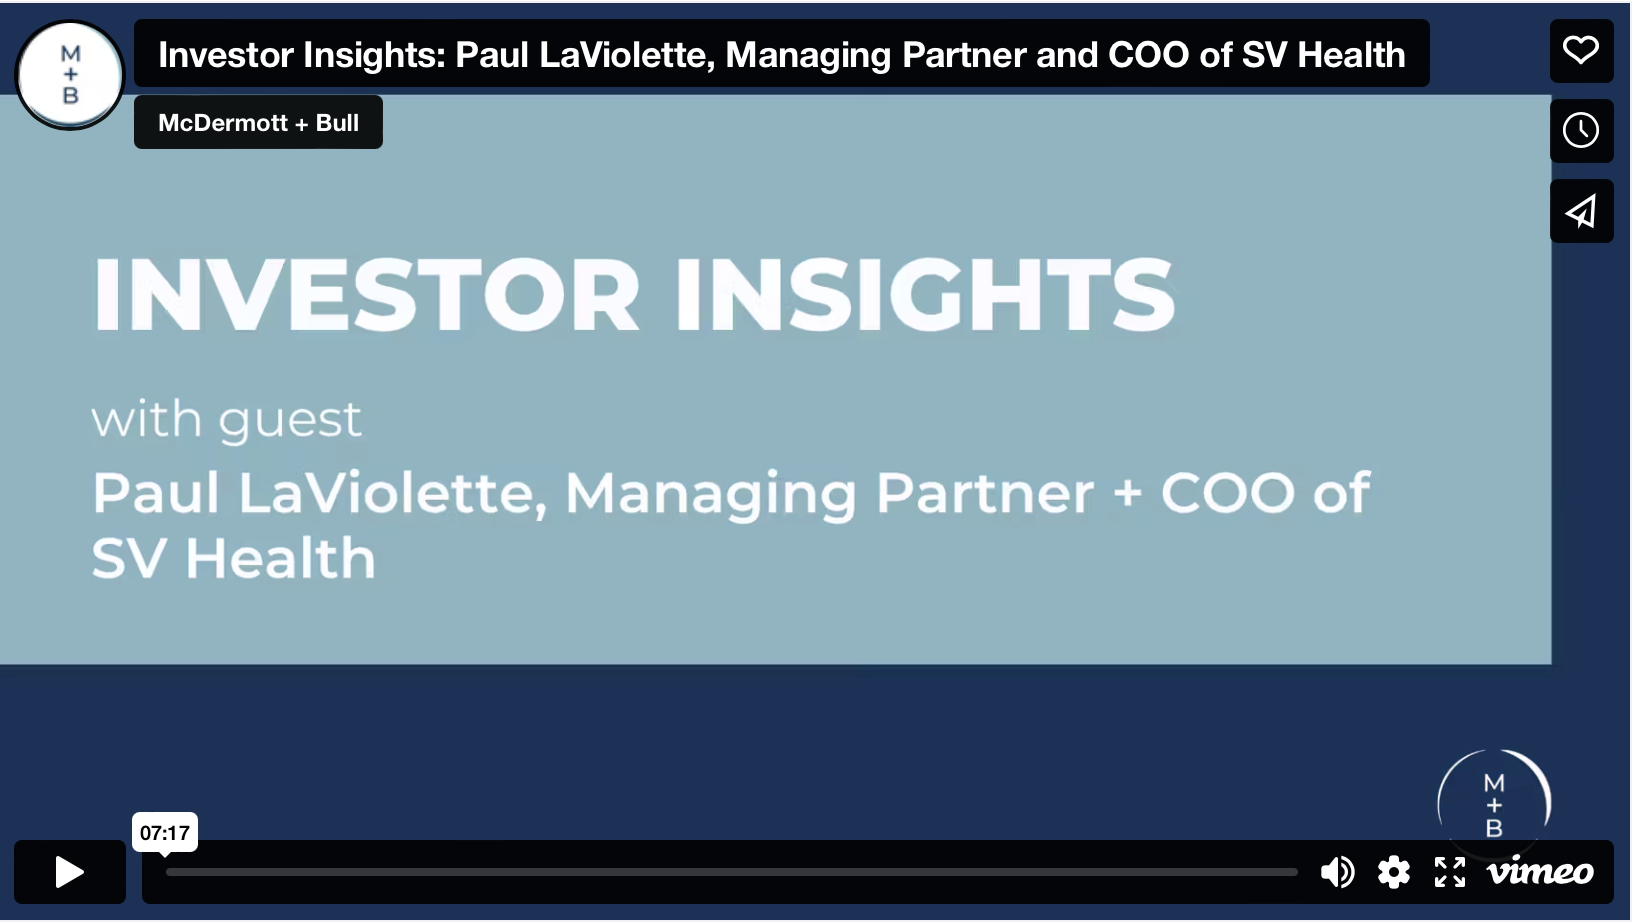 Investor Insights: Paul LaViolette, Managing Partner and COO of SV Health